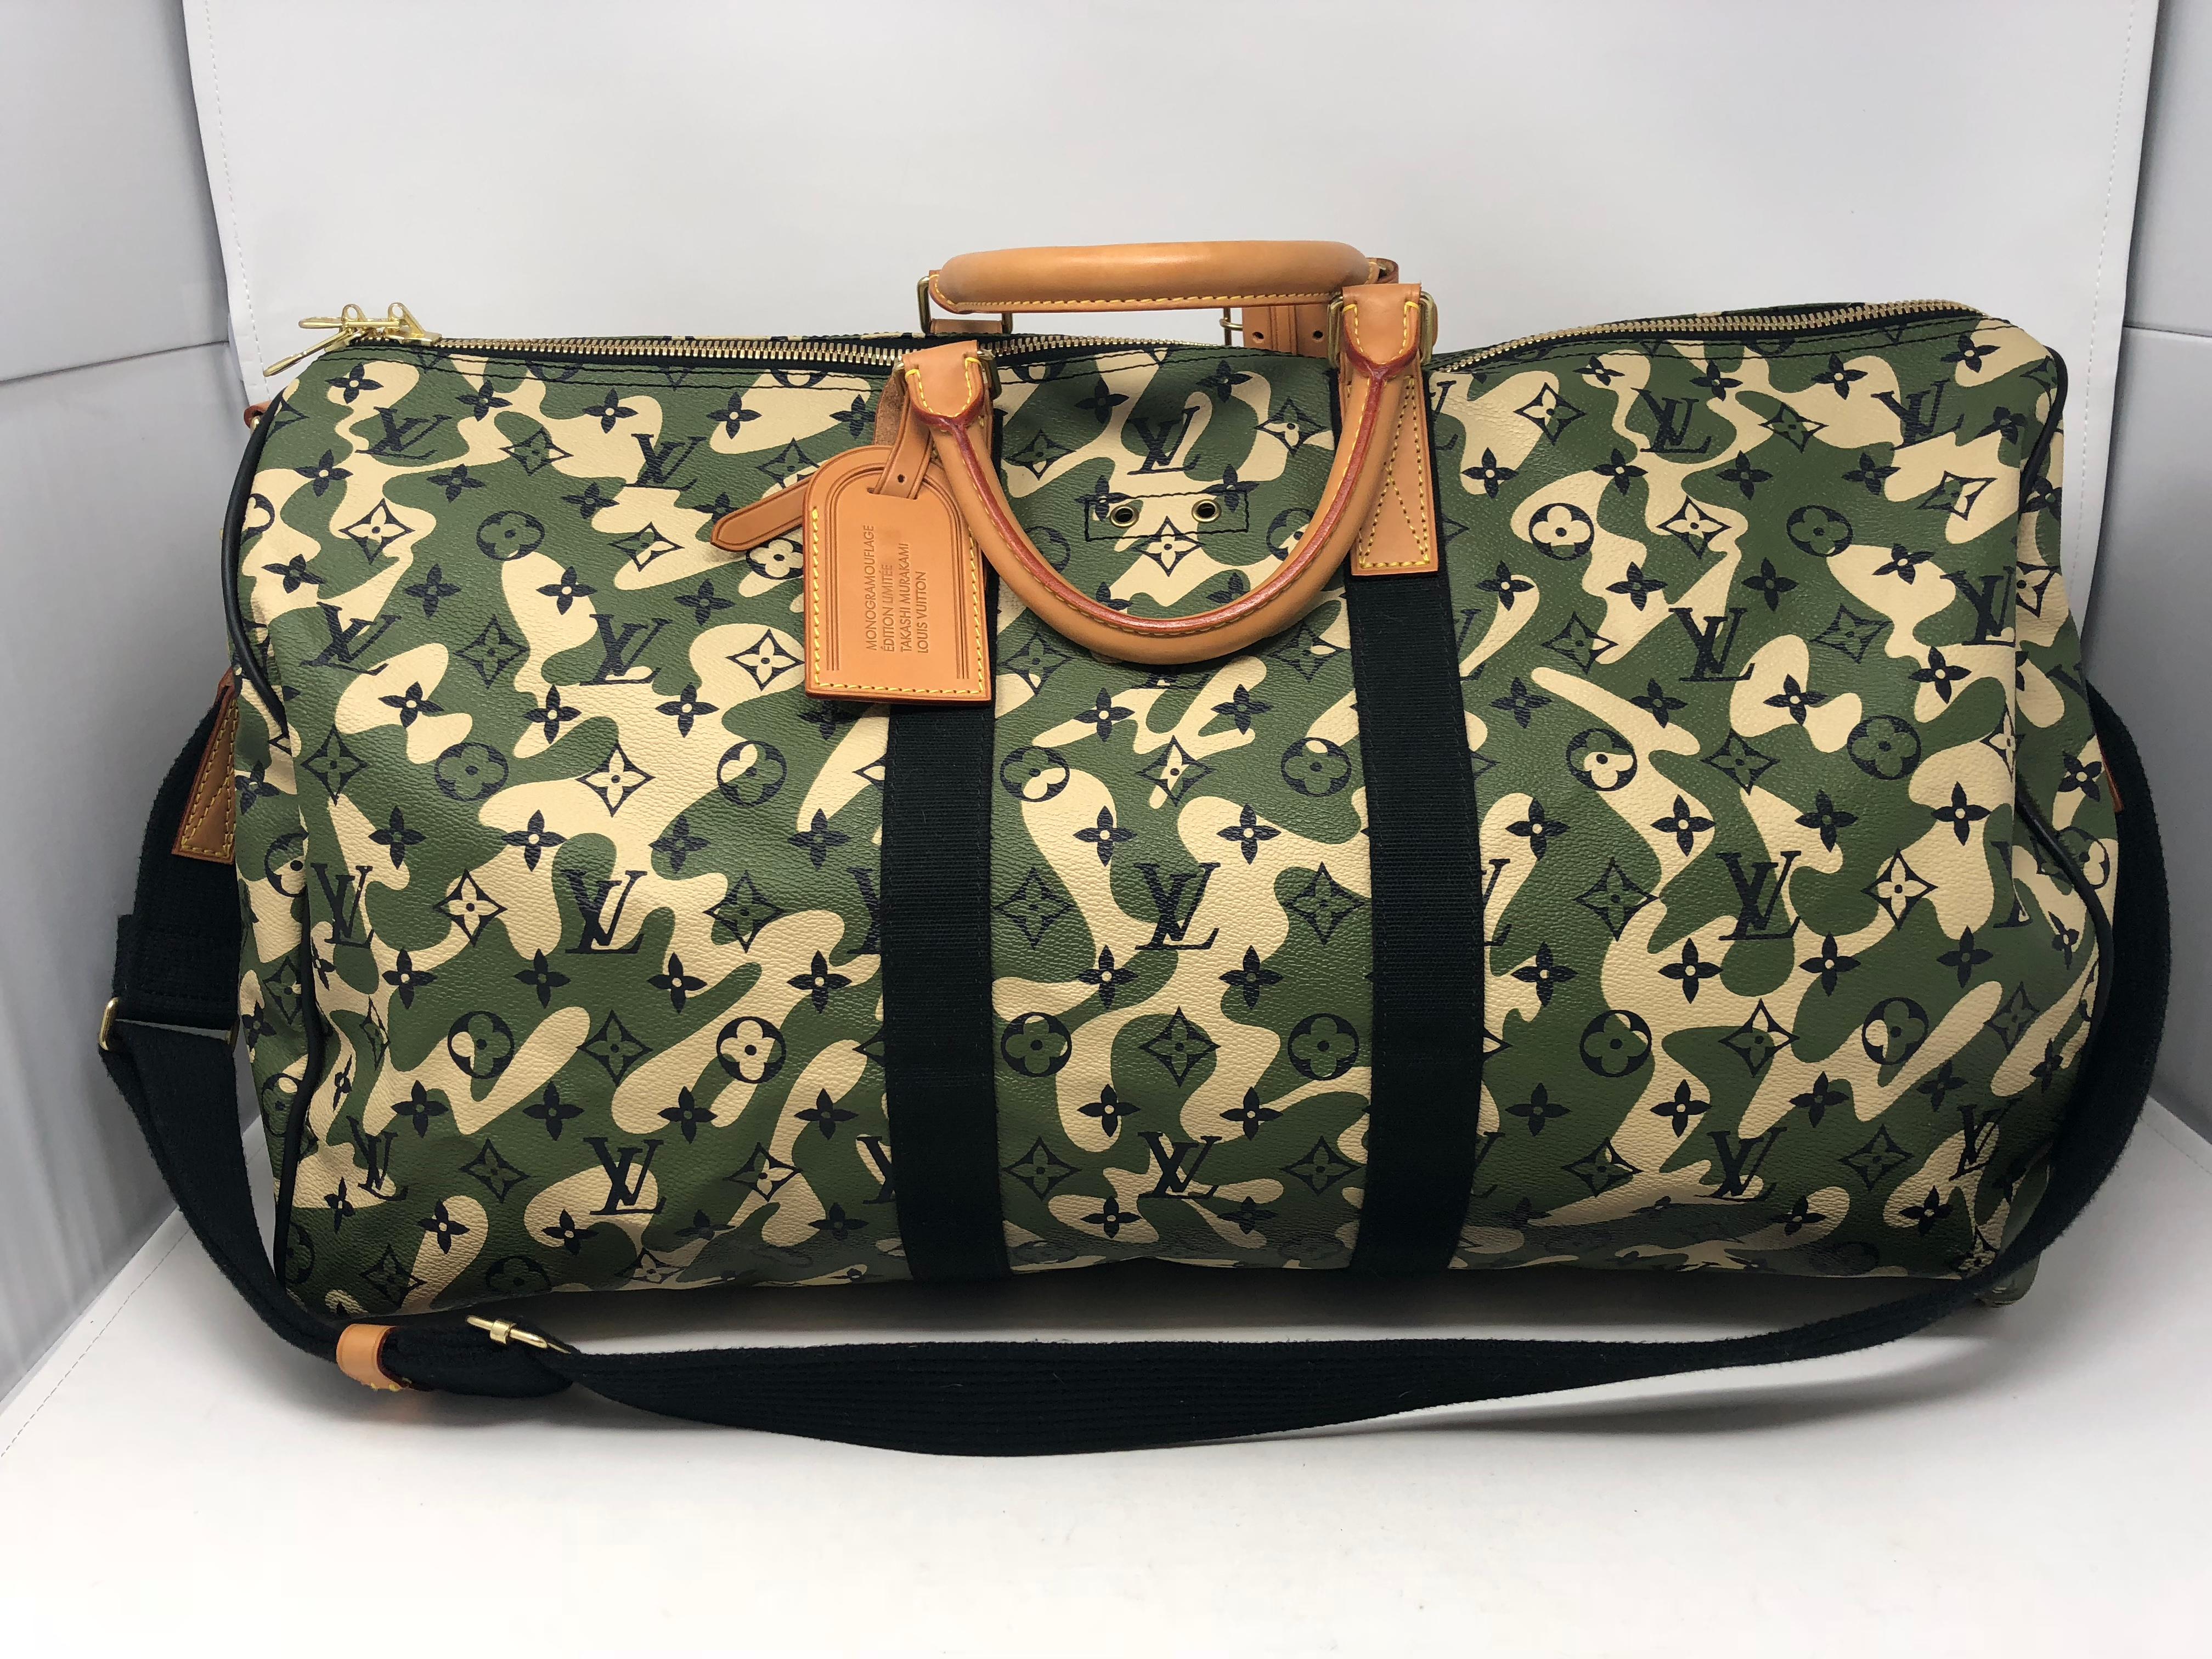 Louis Vuitton Monogramouflage Canvas Keepall 55 Bandouliere with strap. Very limited and extremely rare Japanese Pop artist Takashi Murakami and Marc Jacobs  designed this bag. They reinvented the classic monogram with a camouflage motif. Great